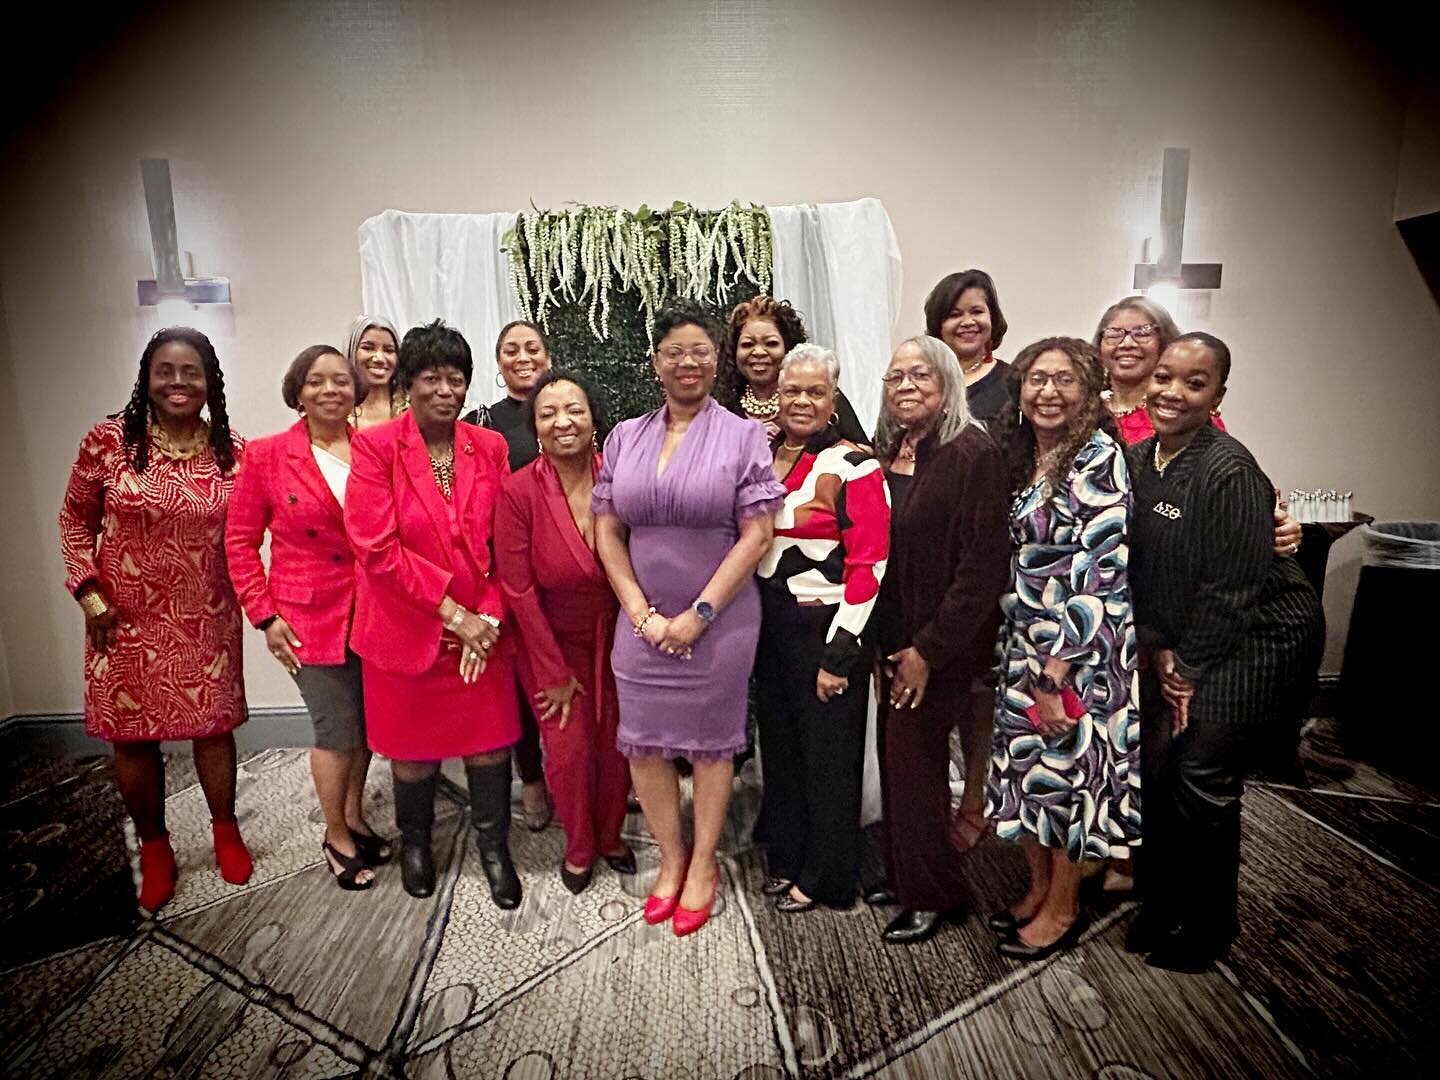 Congratulations to our sorors of @cincyalumdeltas on a successful scholarship fundraising event! We truly enjoyed ourselves at the 2024 Soulful Sounds Brunch. Well done sorors! 👏🏾👏🏾👏🏾
#dst1913 #cincydeltas #cqcadst #sincerityinoursisterhood #cq